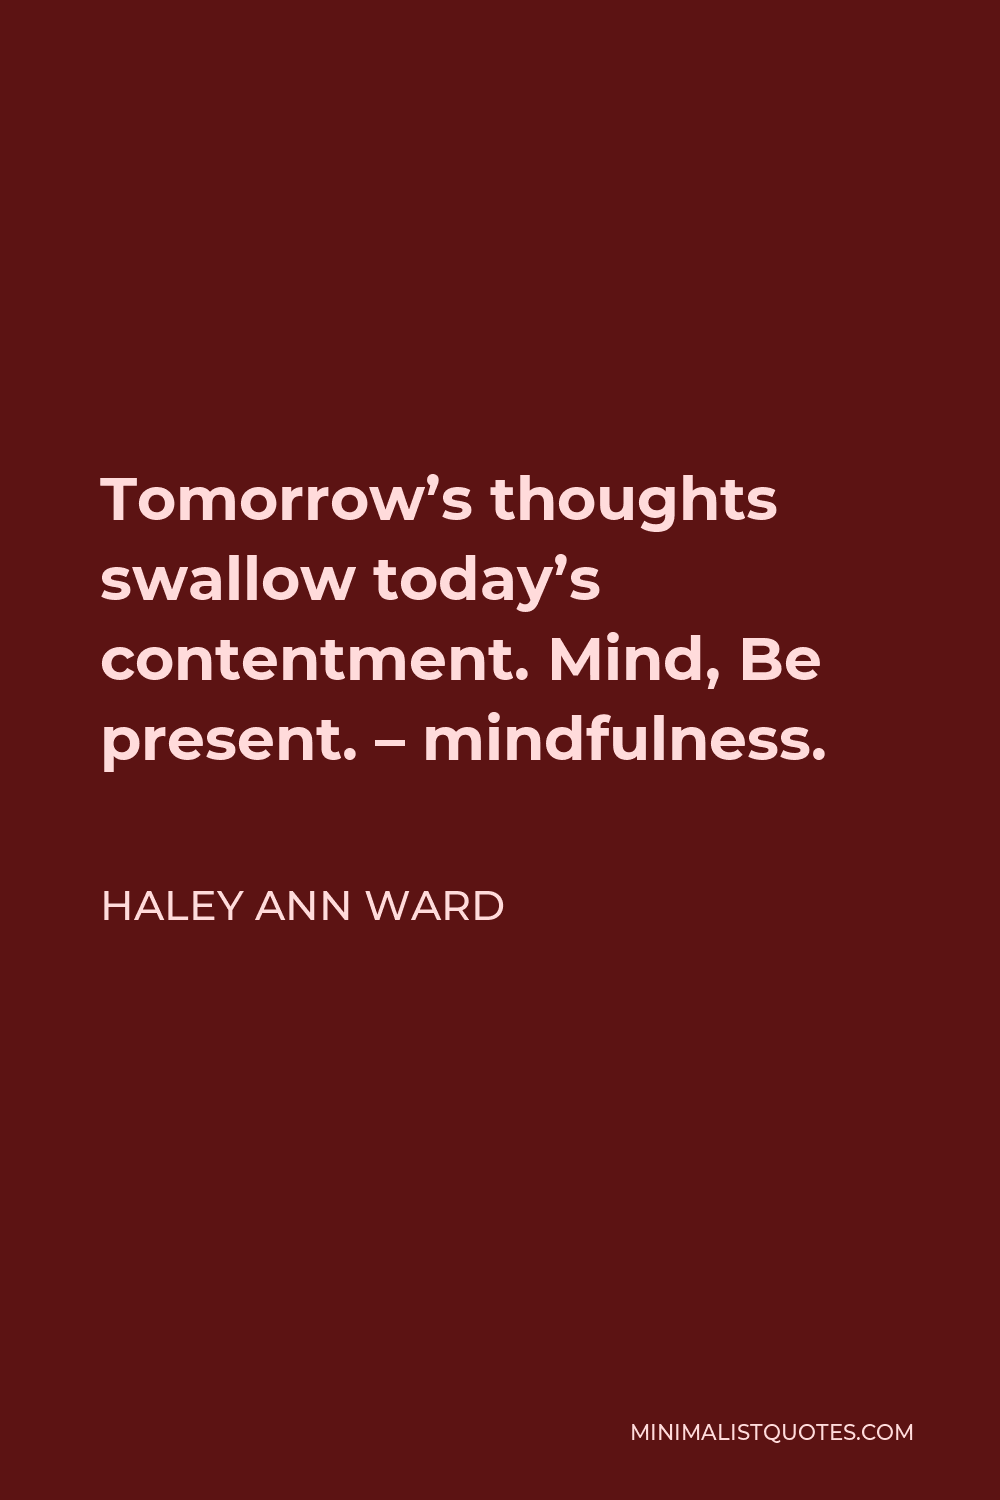 Haley Ann Ward Quote - Tomorrow’s thoughts swallow today’s contentment. Mind, Be present. – mindfulness.